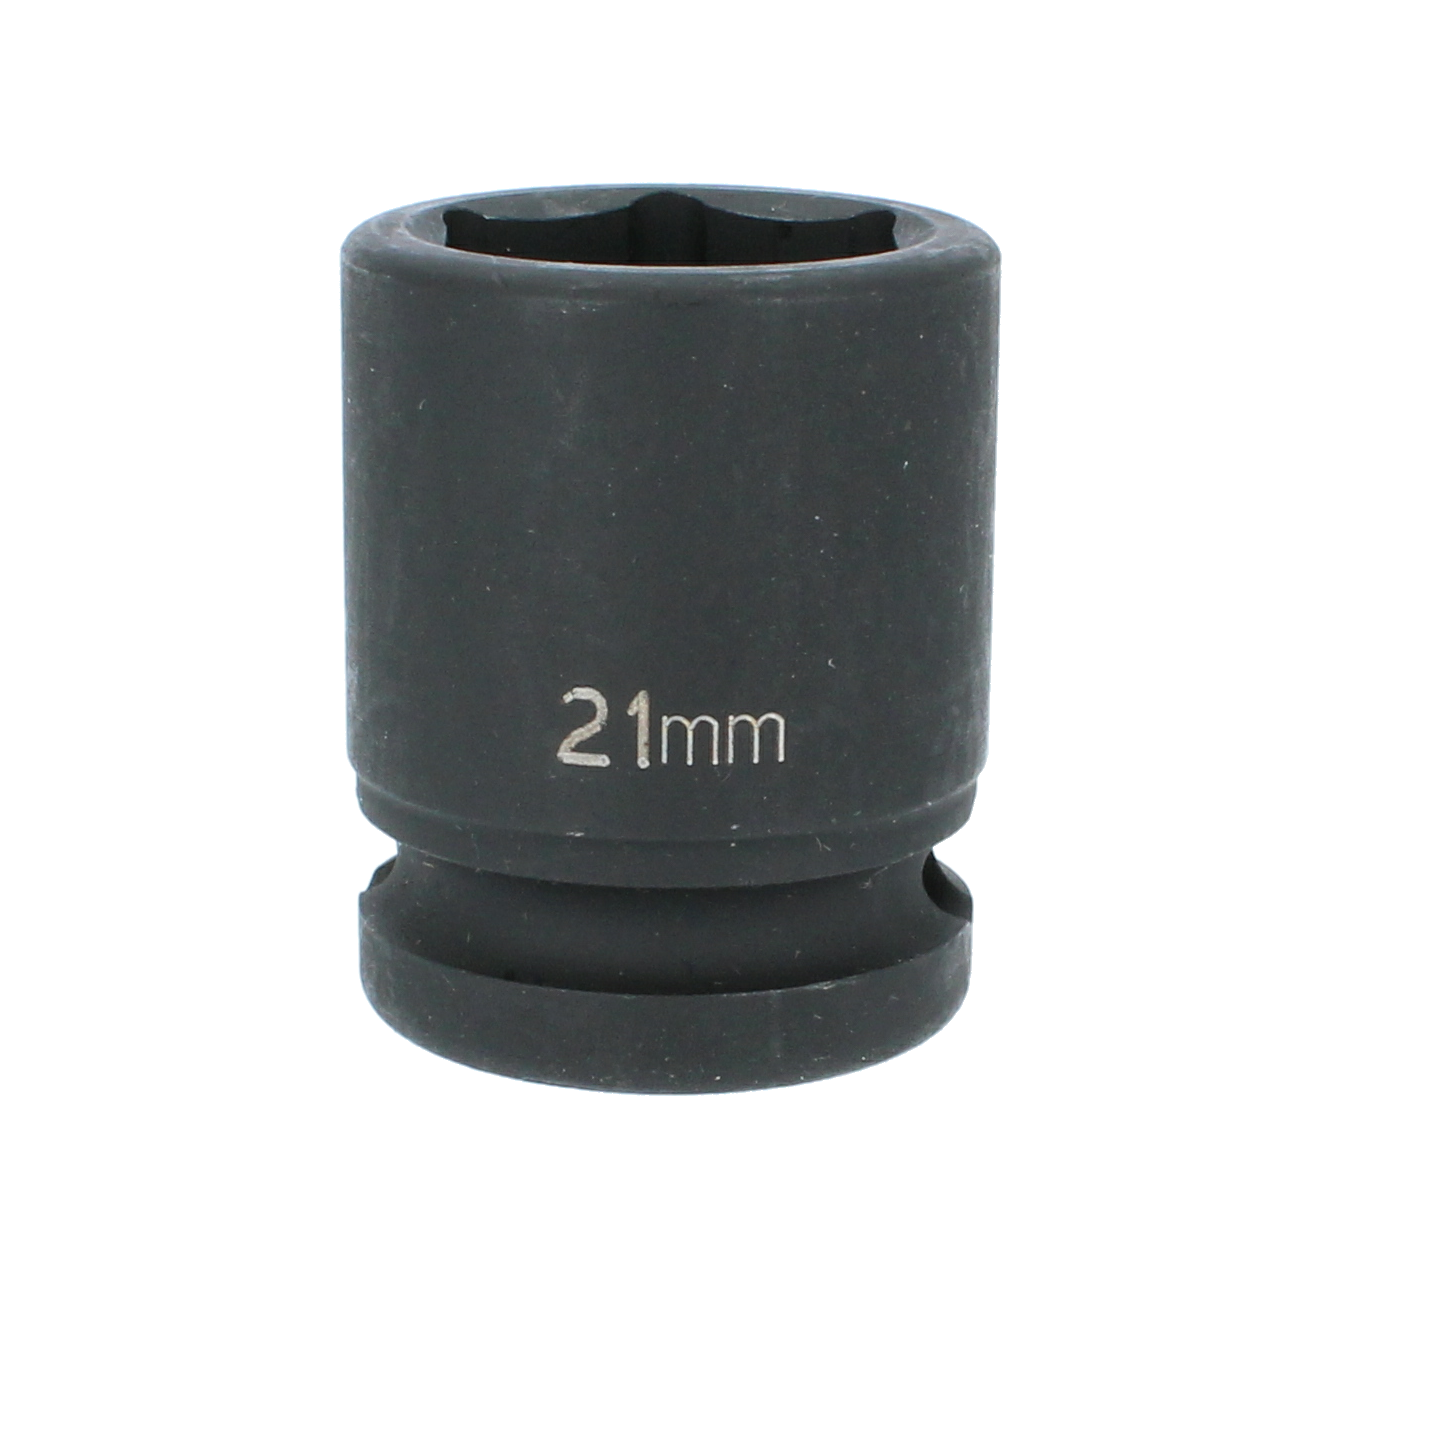 krafttop magnettop 10mm x 1/2"